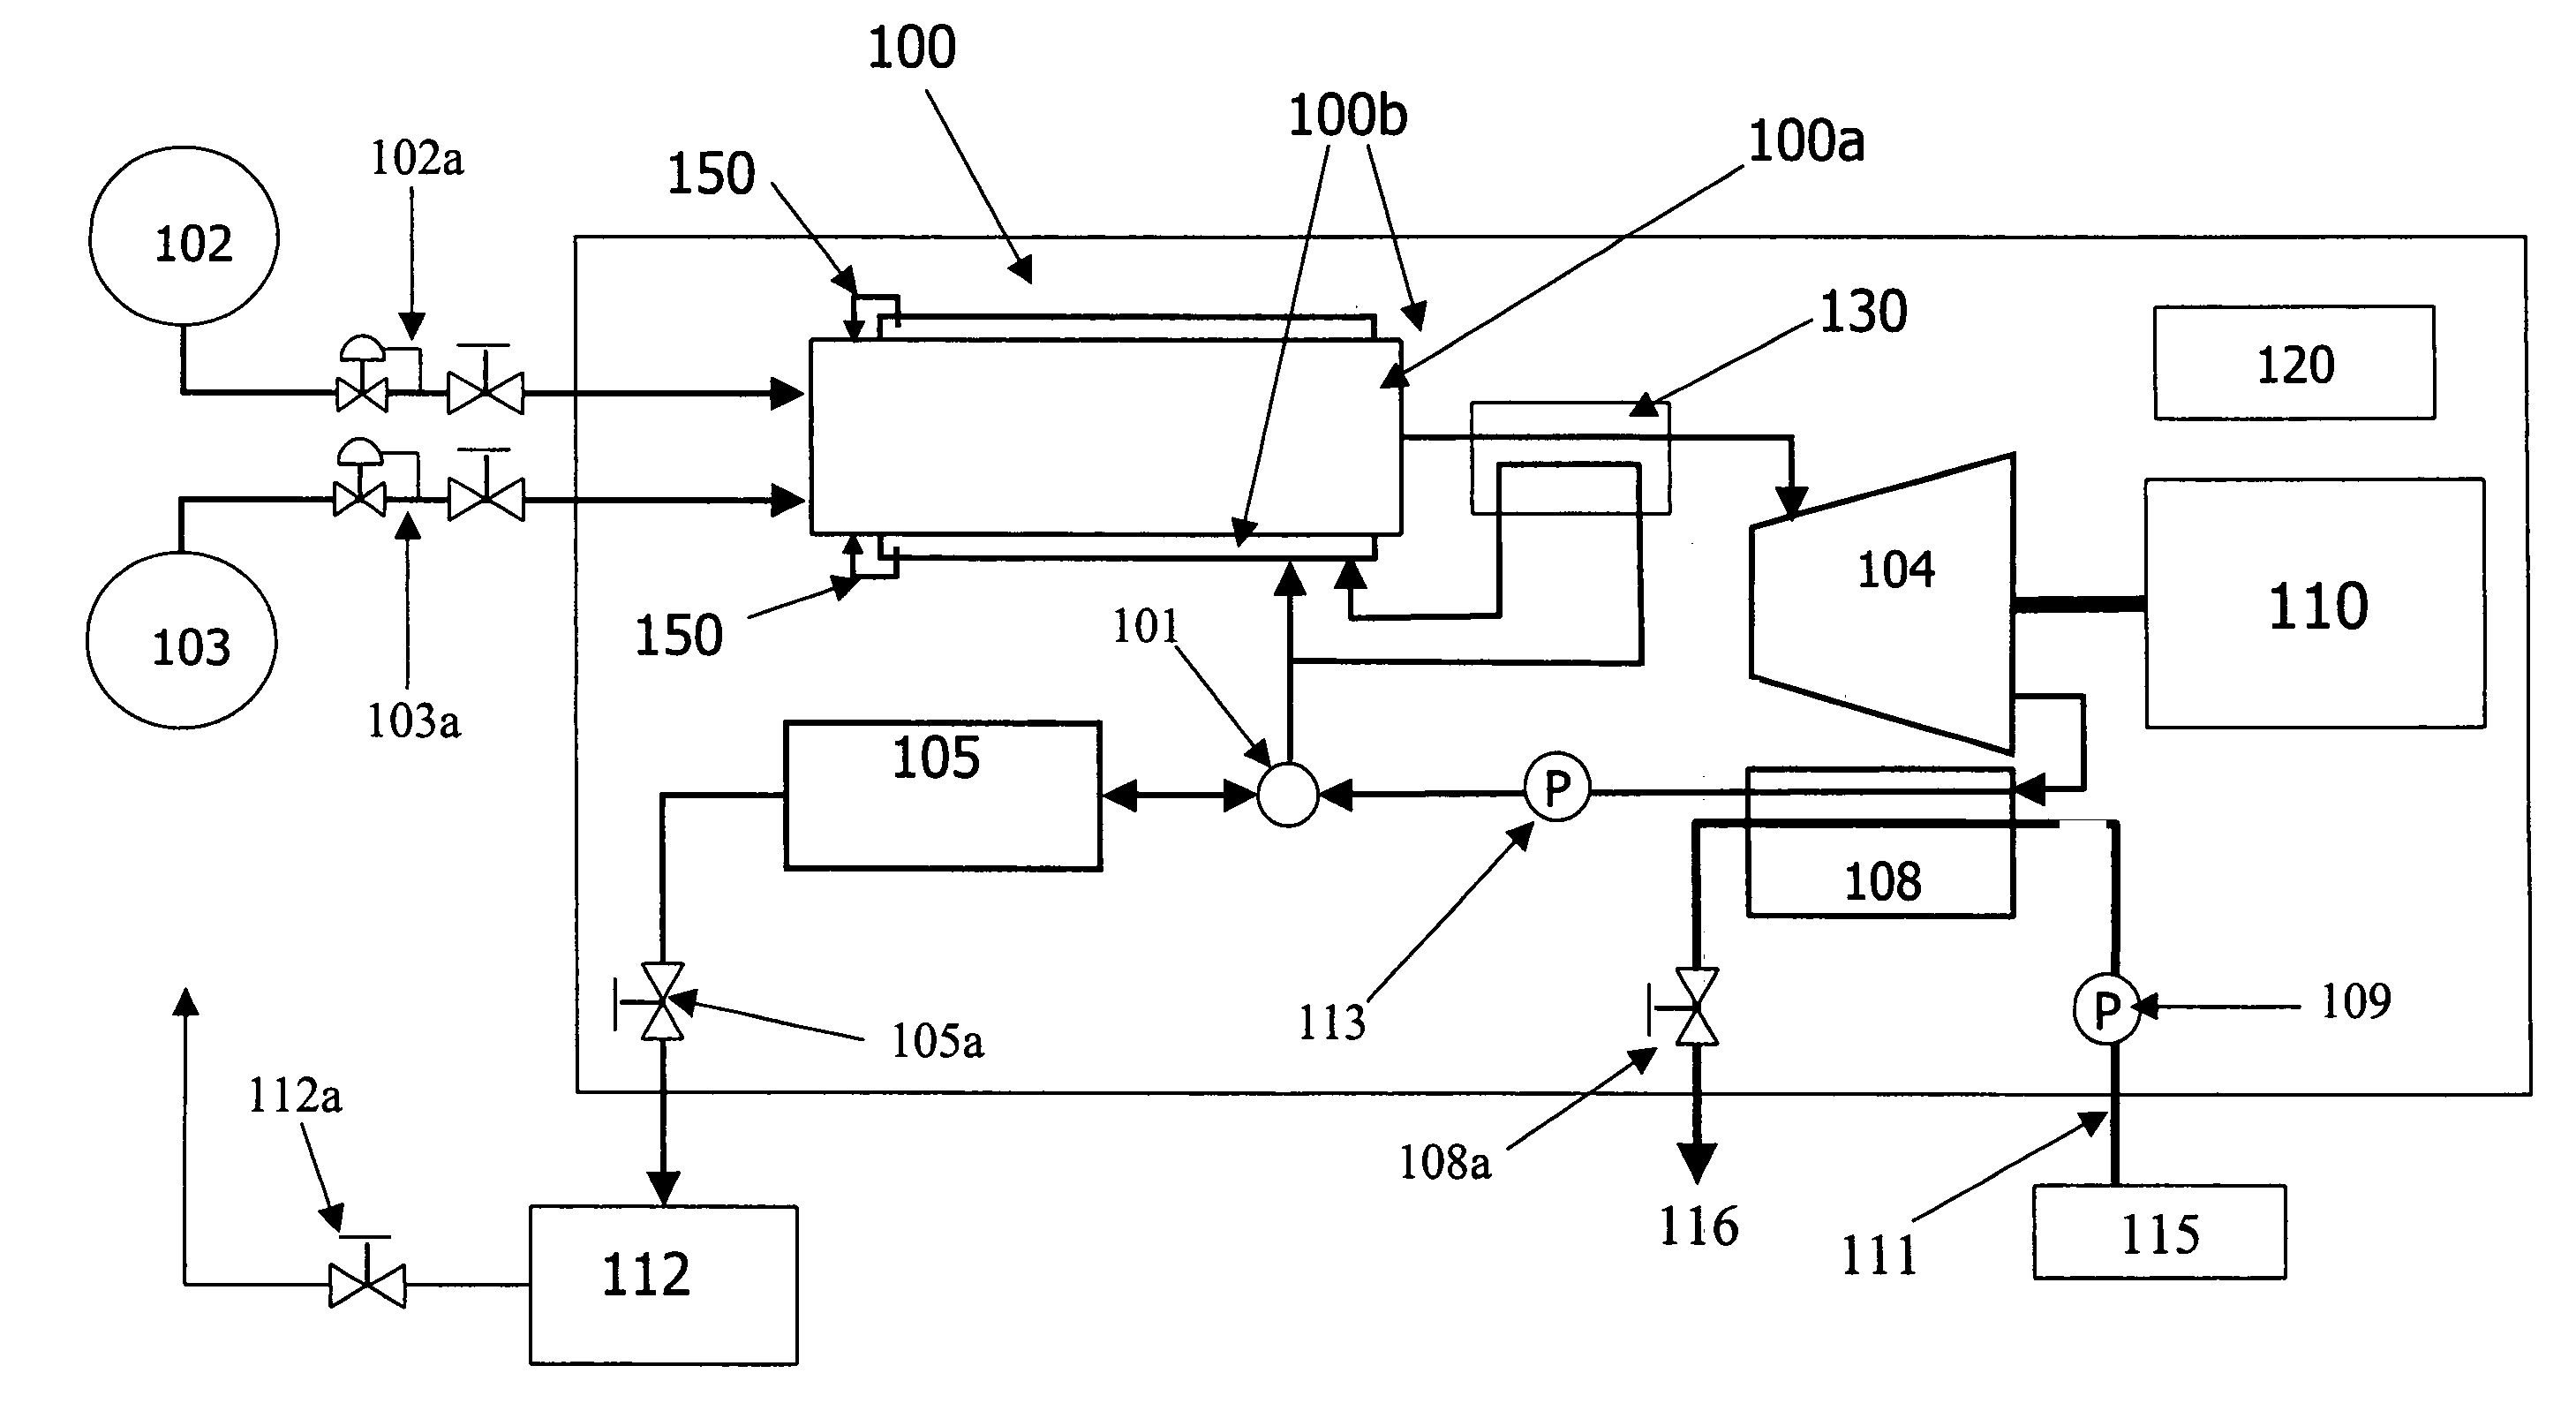 Closed-loop cooling system for a hydrogen/oxygen based combustor